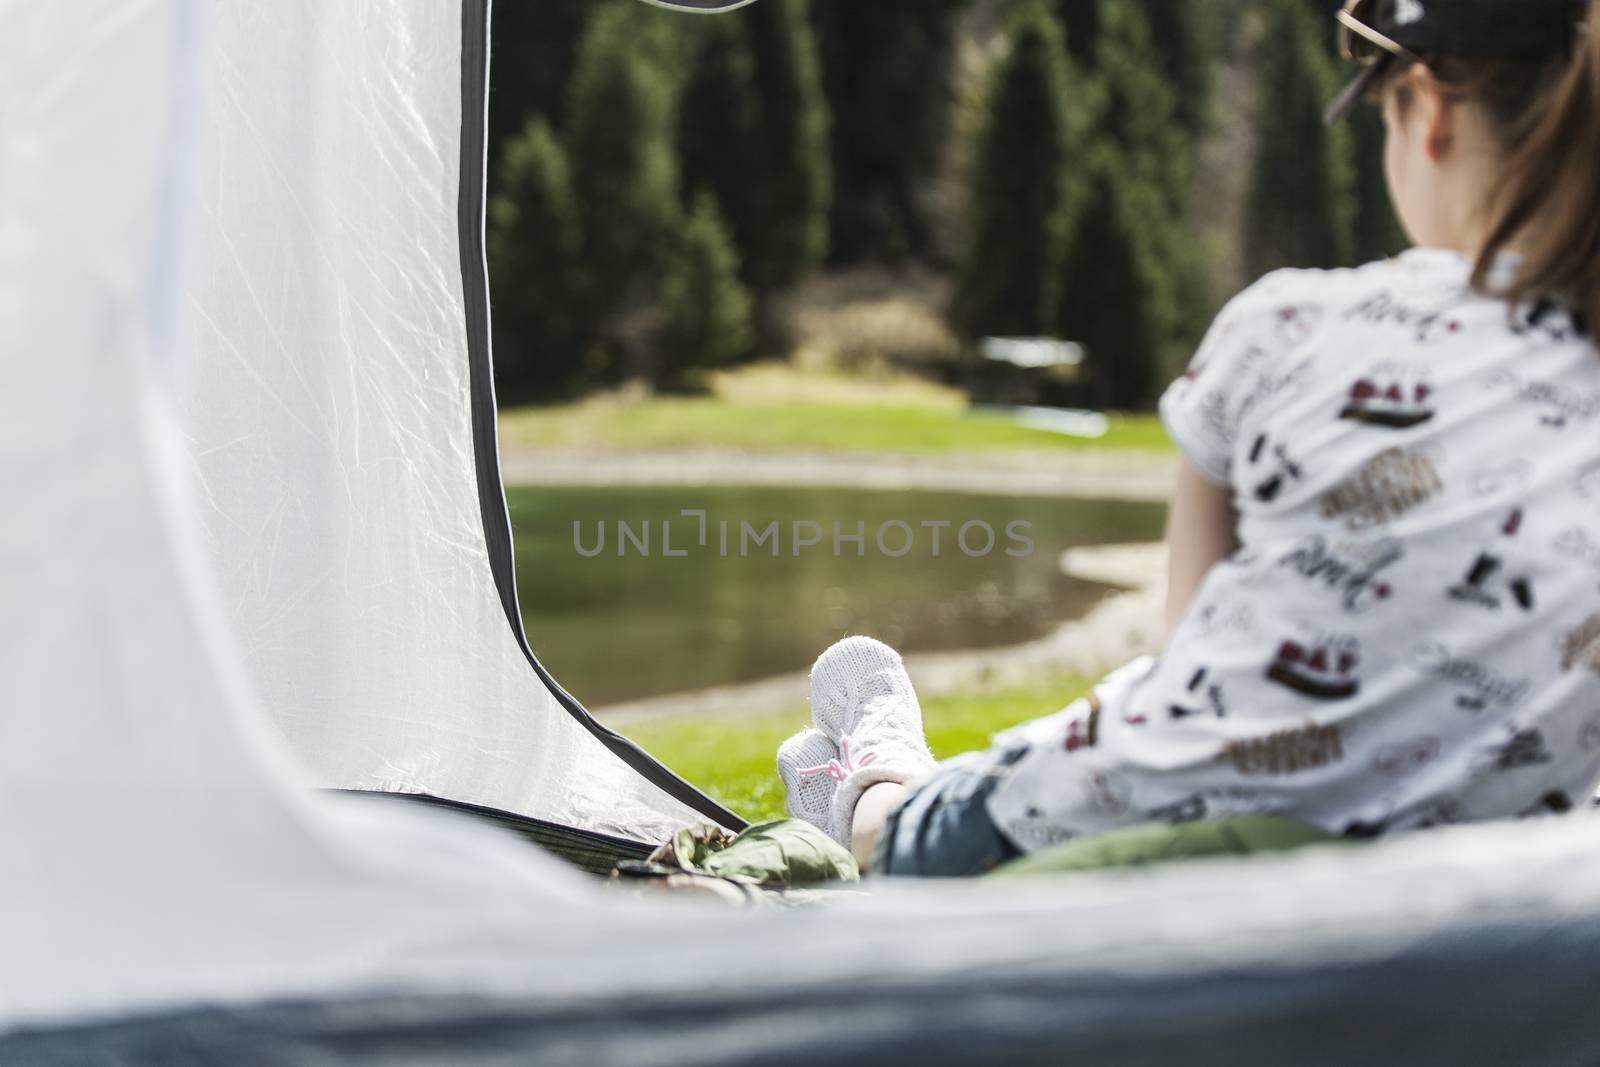 The girl on vacation, sits in tent having put out feet in warm socks